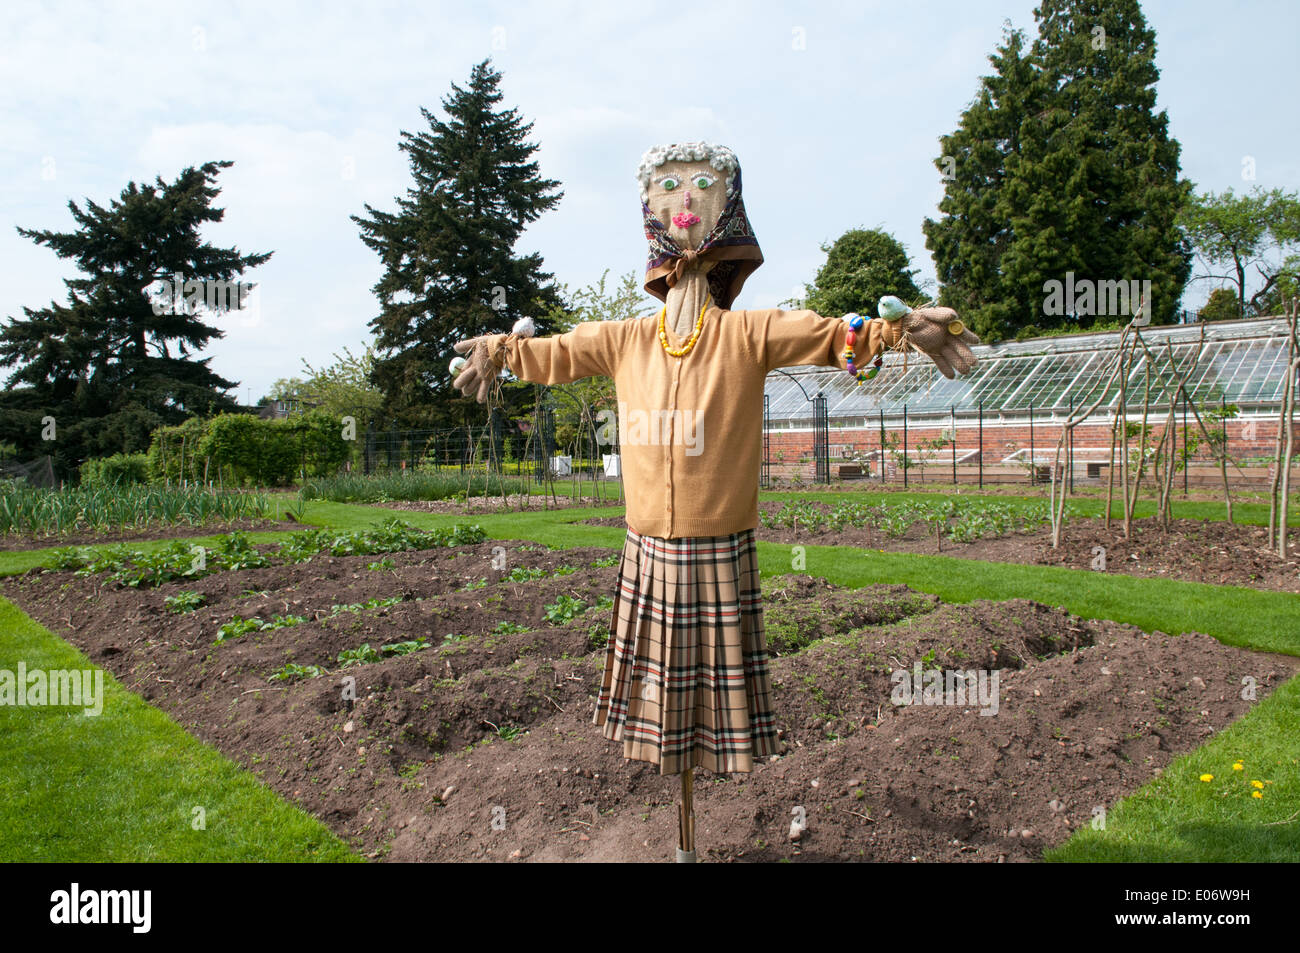 Cute old lady scarecrow wearing pearls, a head scarf and cardigan in the walled garden at National Trust house Wightwick Manor Stock Photo